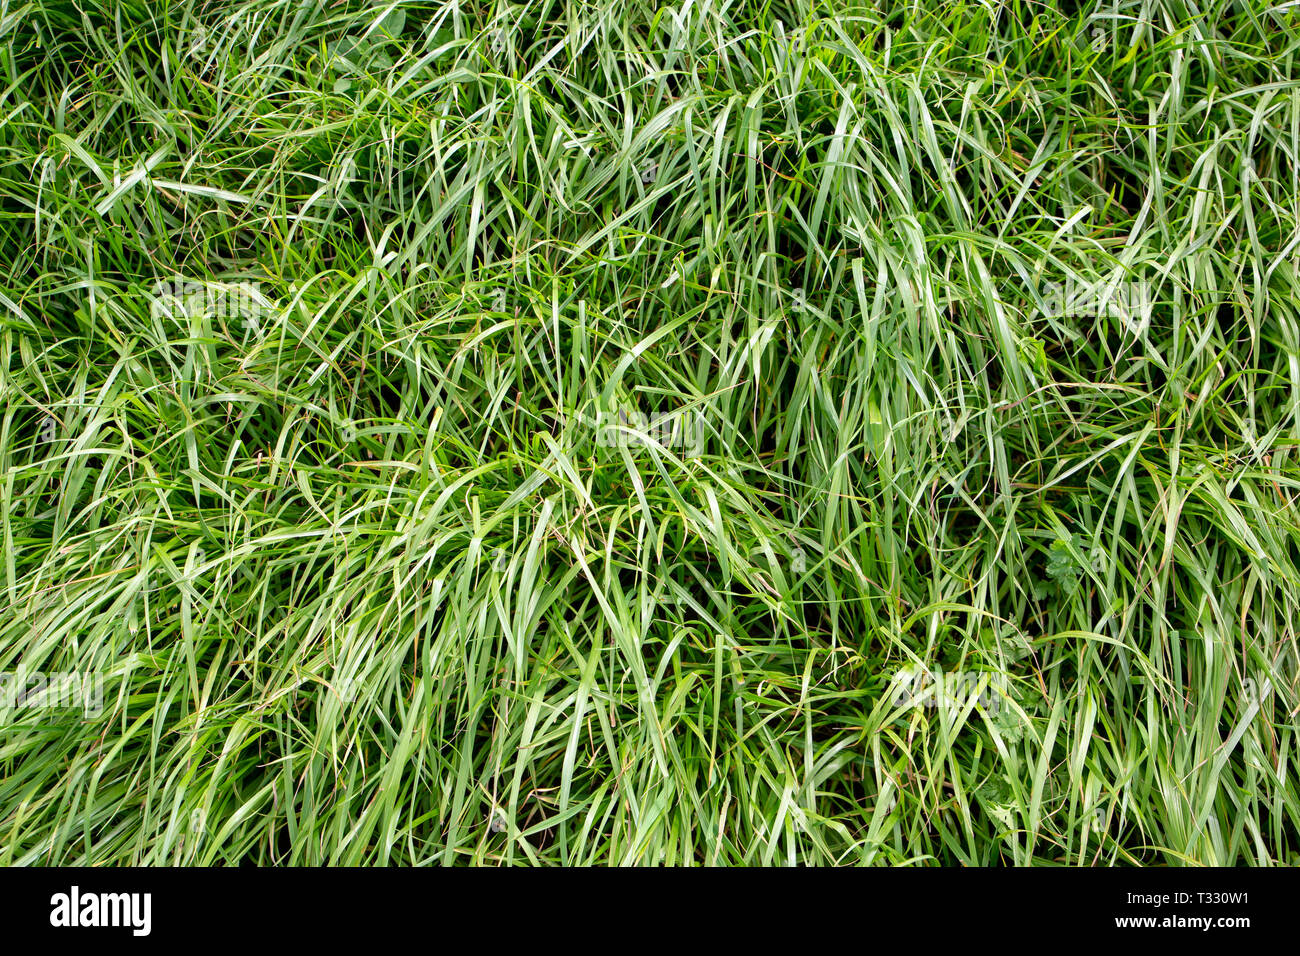 Lush, fast-growing diploid Italian ryegrass grown by farmers for nutritious rural stock feed and silage Stock Photo